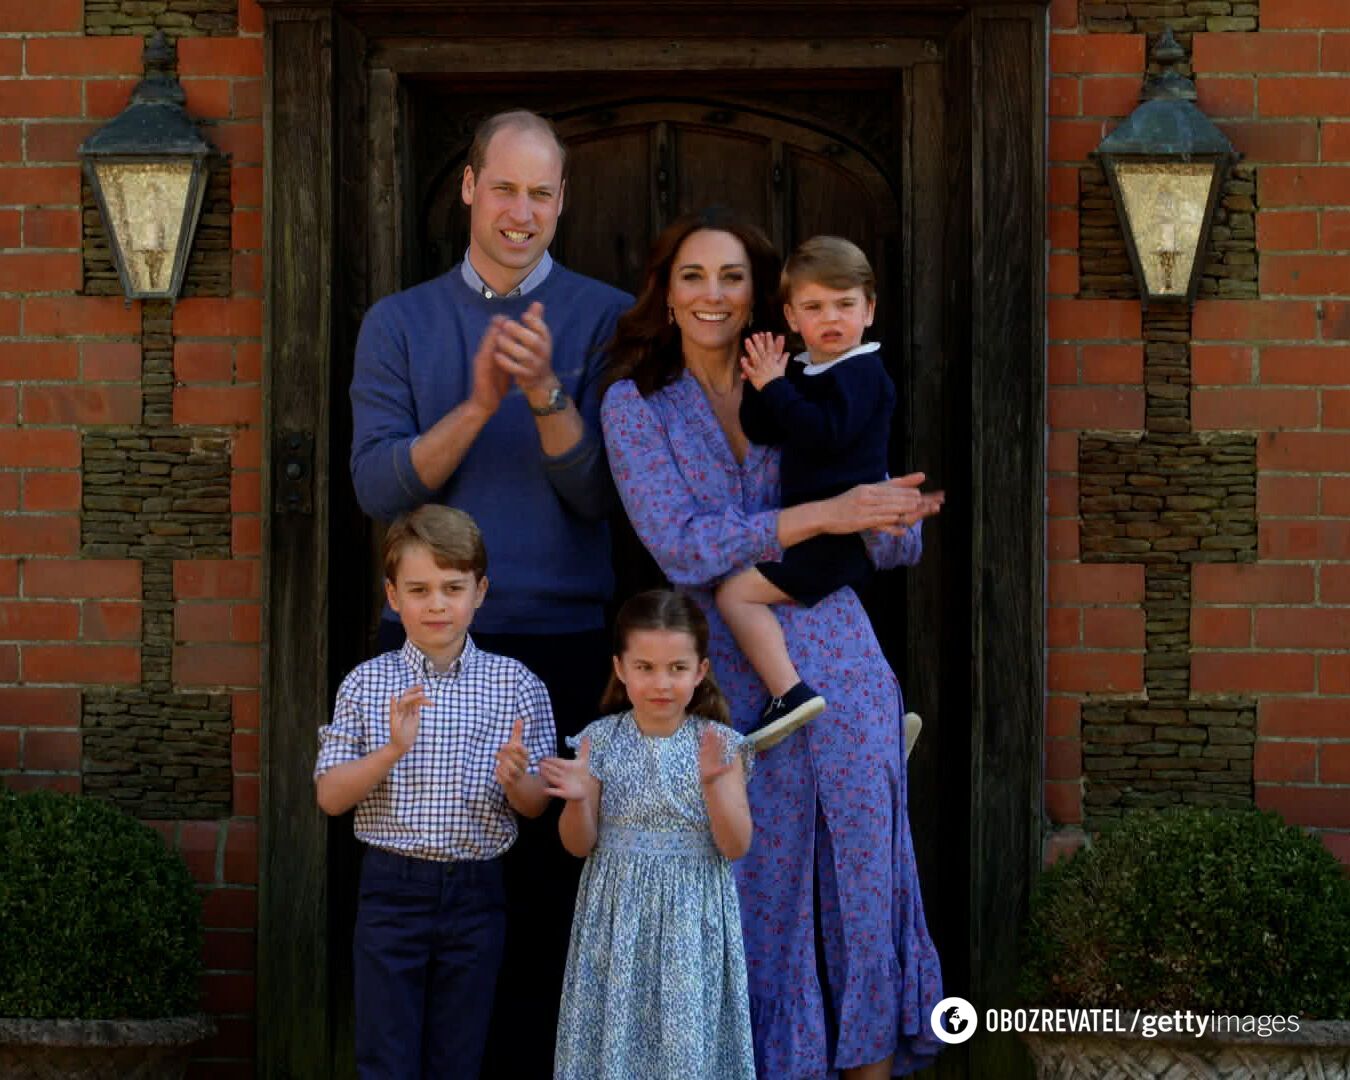 It has been revealed why Kate Middleton's children did not visit her in hospital after abdominal surgery